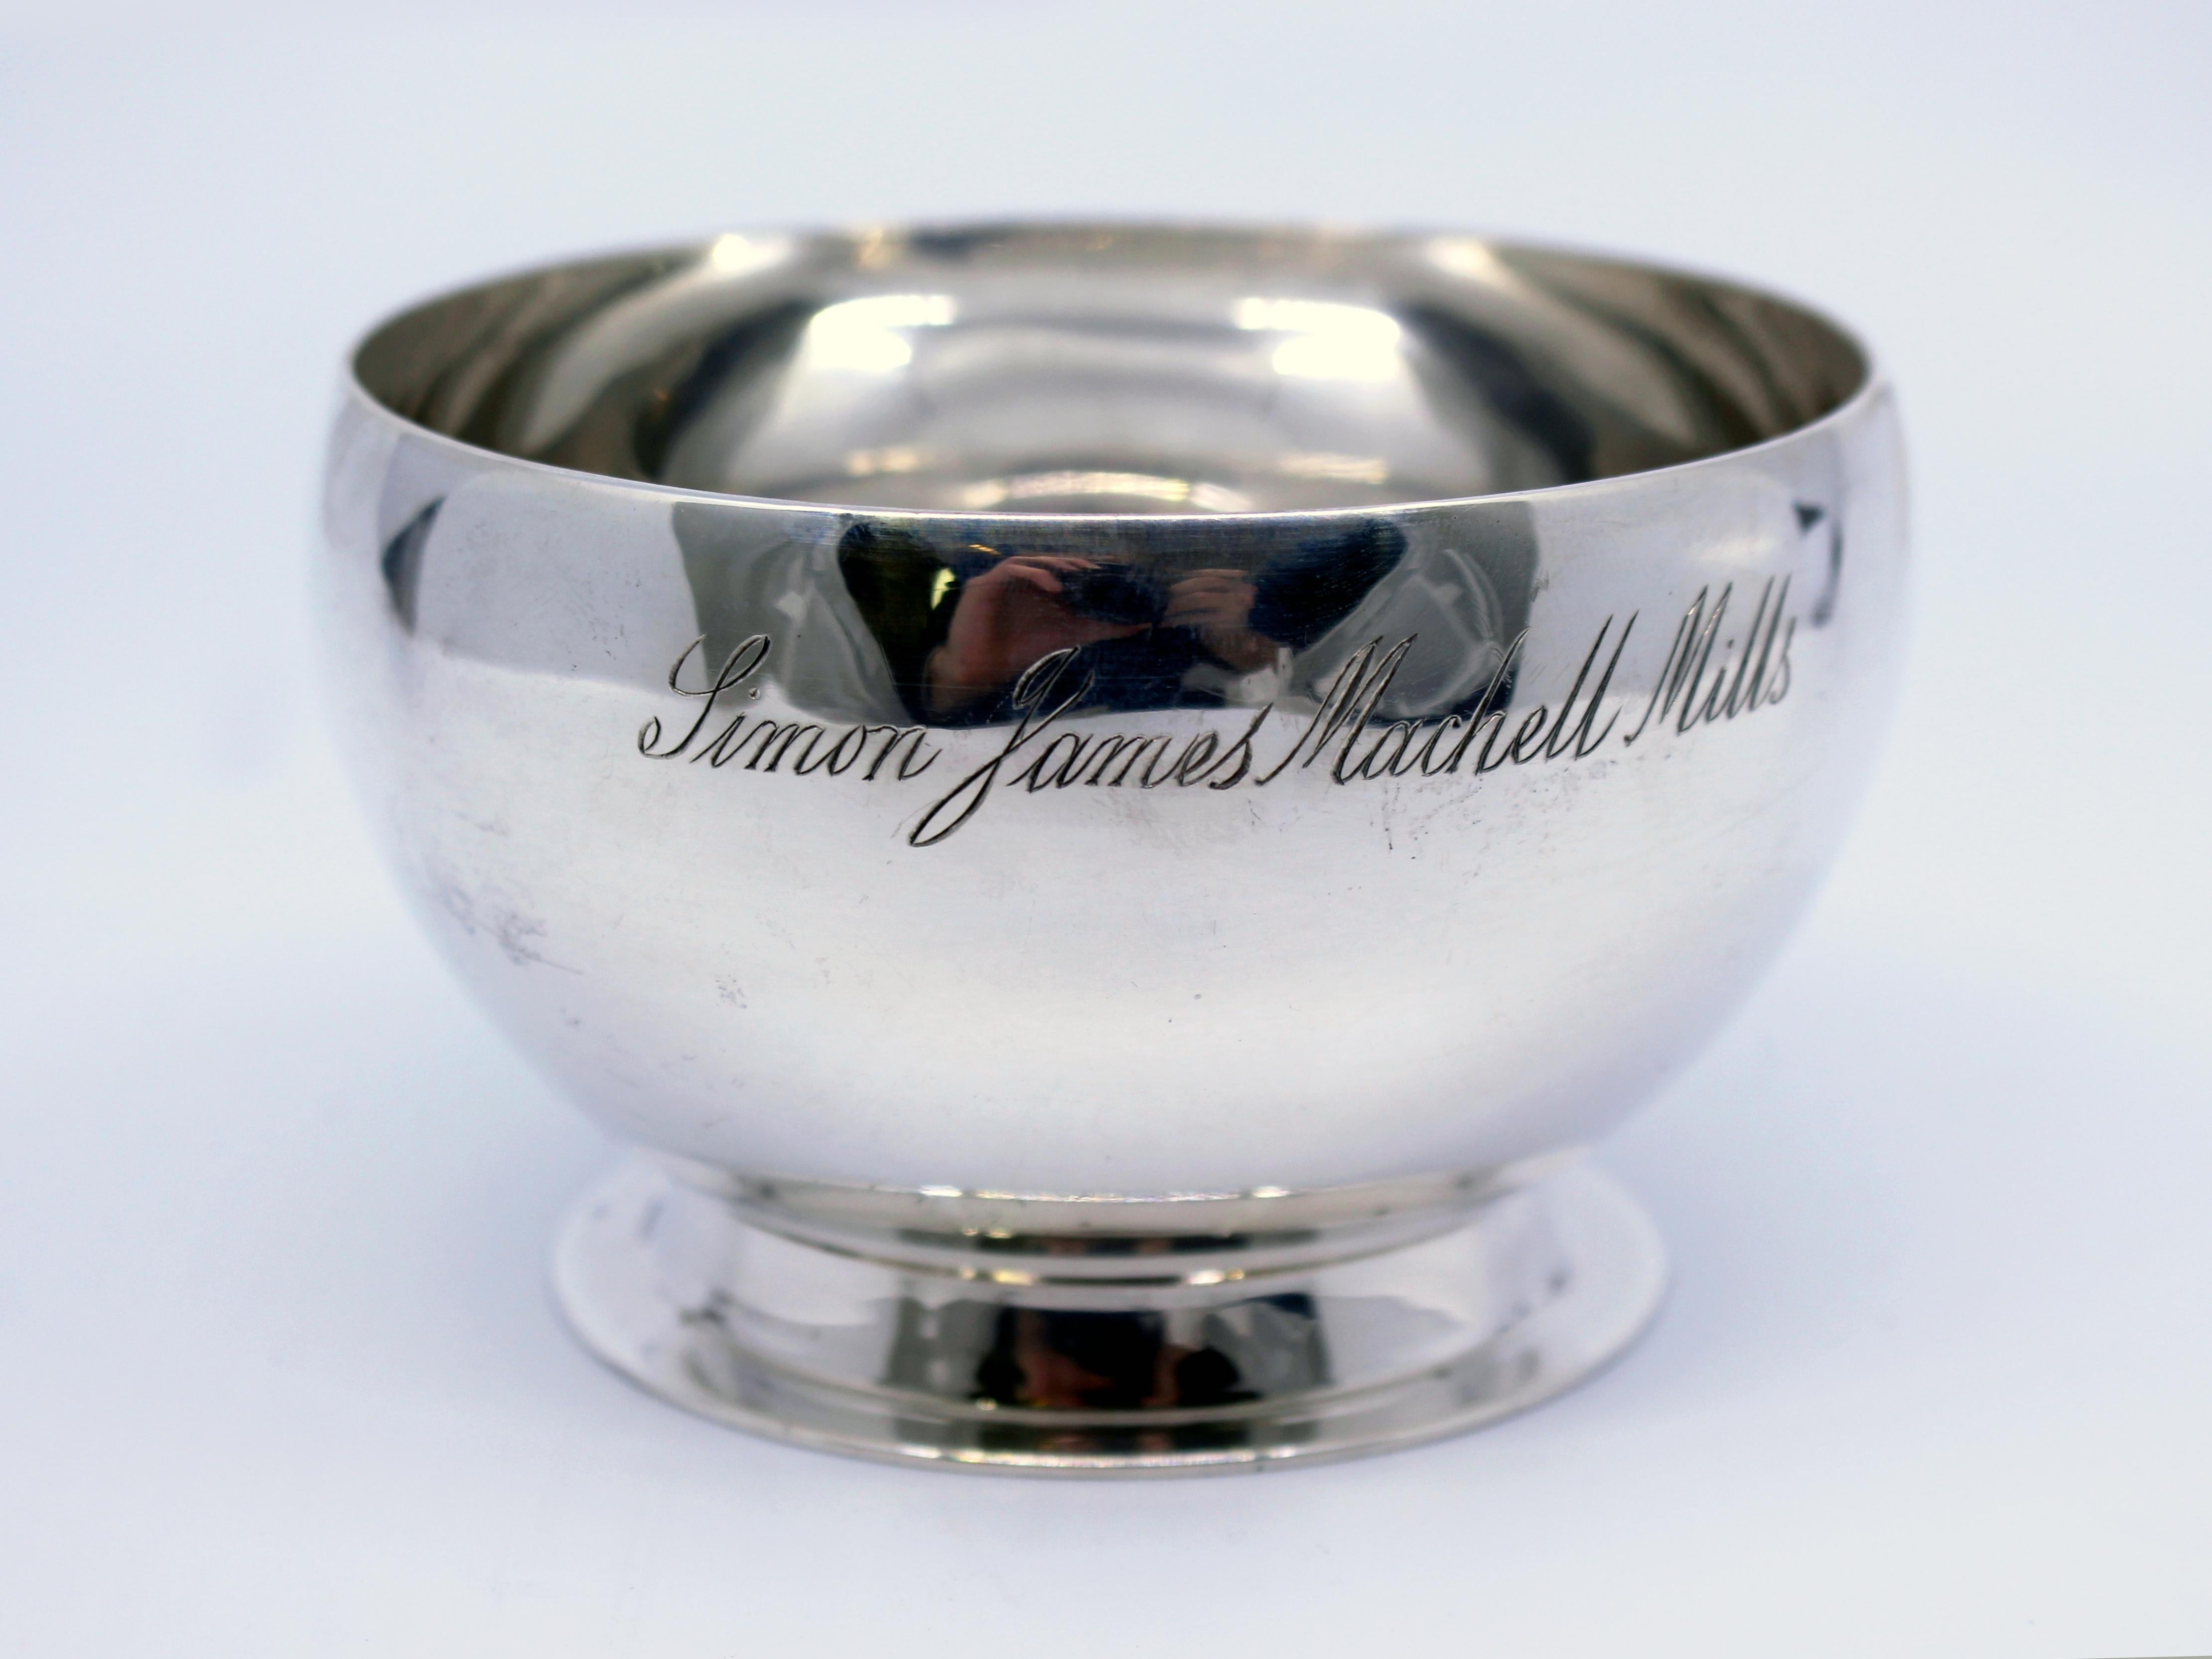 Period 
Dated 1939, English

Maker
Harrods

Hallmark 
London 1939

Weight 171.1 g

Condition 
Very good shape, without distortion. A few light scratches to silver commensurate with age. Engraved to the side with name. Fully hallmarked to